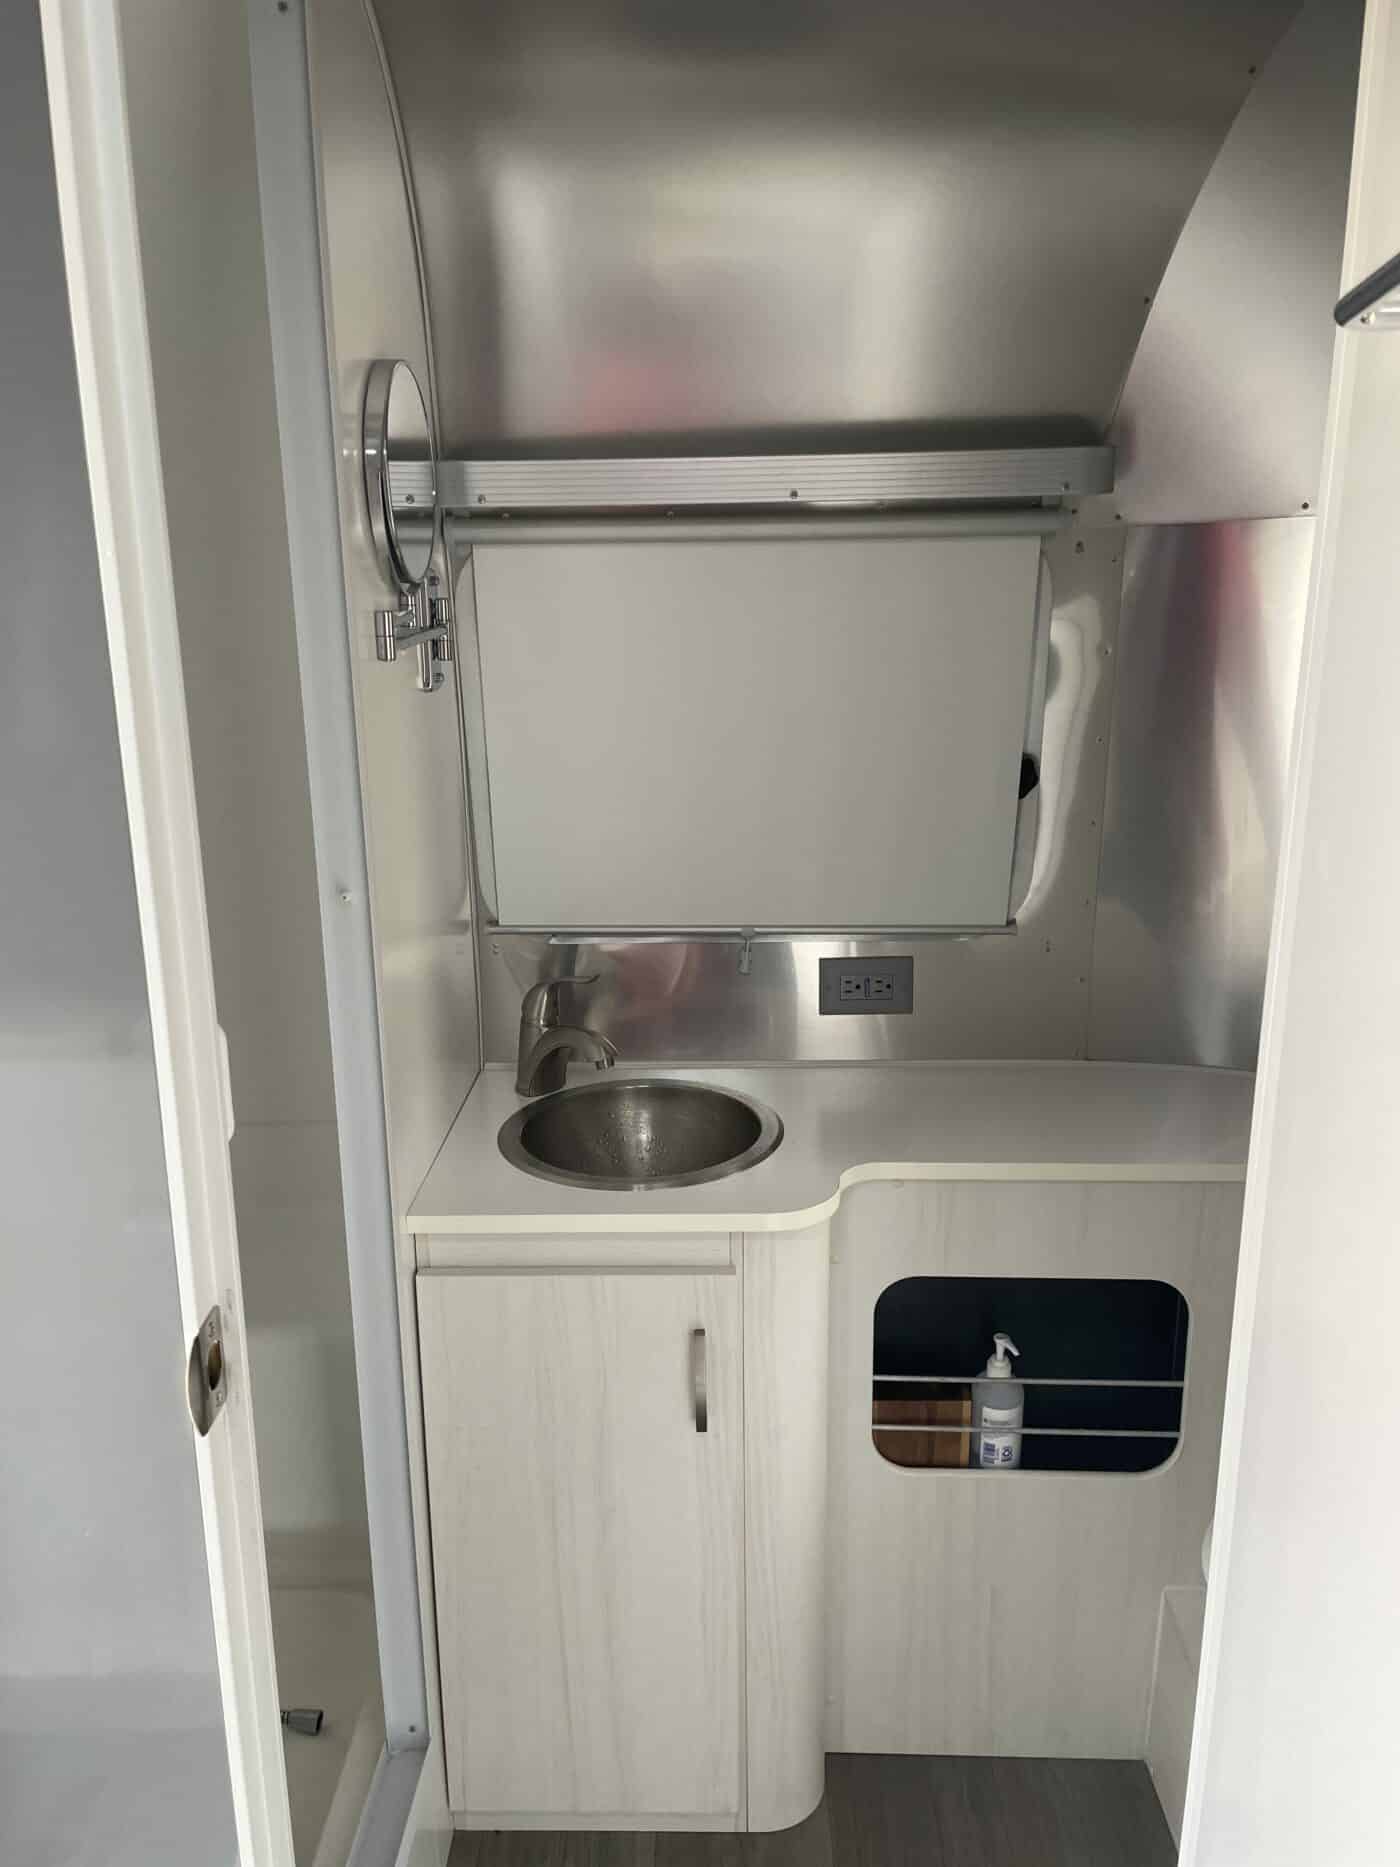 2019 22FT Sport For Sale In LAWTON, Oklahoma - Airstream Marketplace